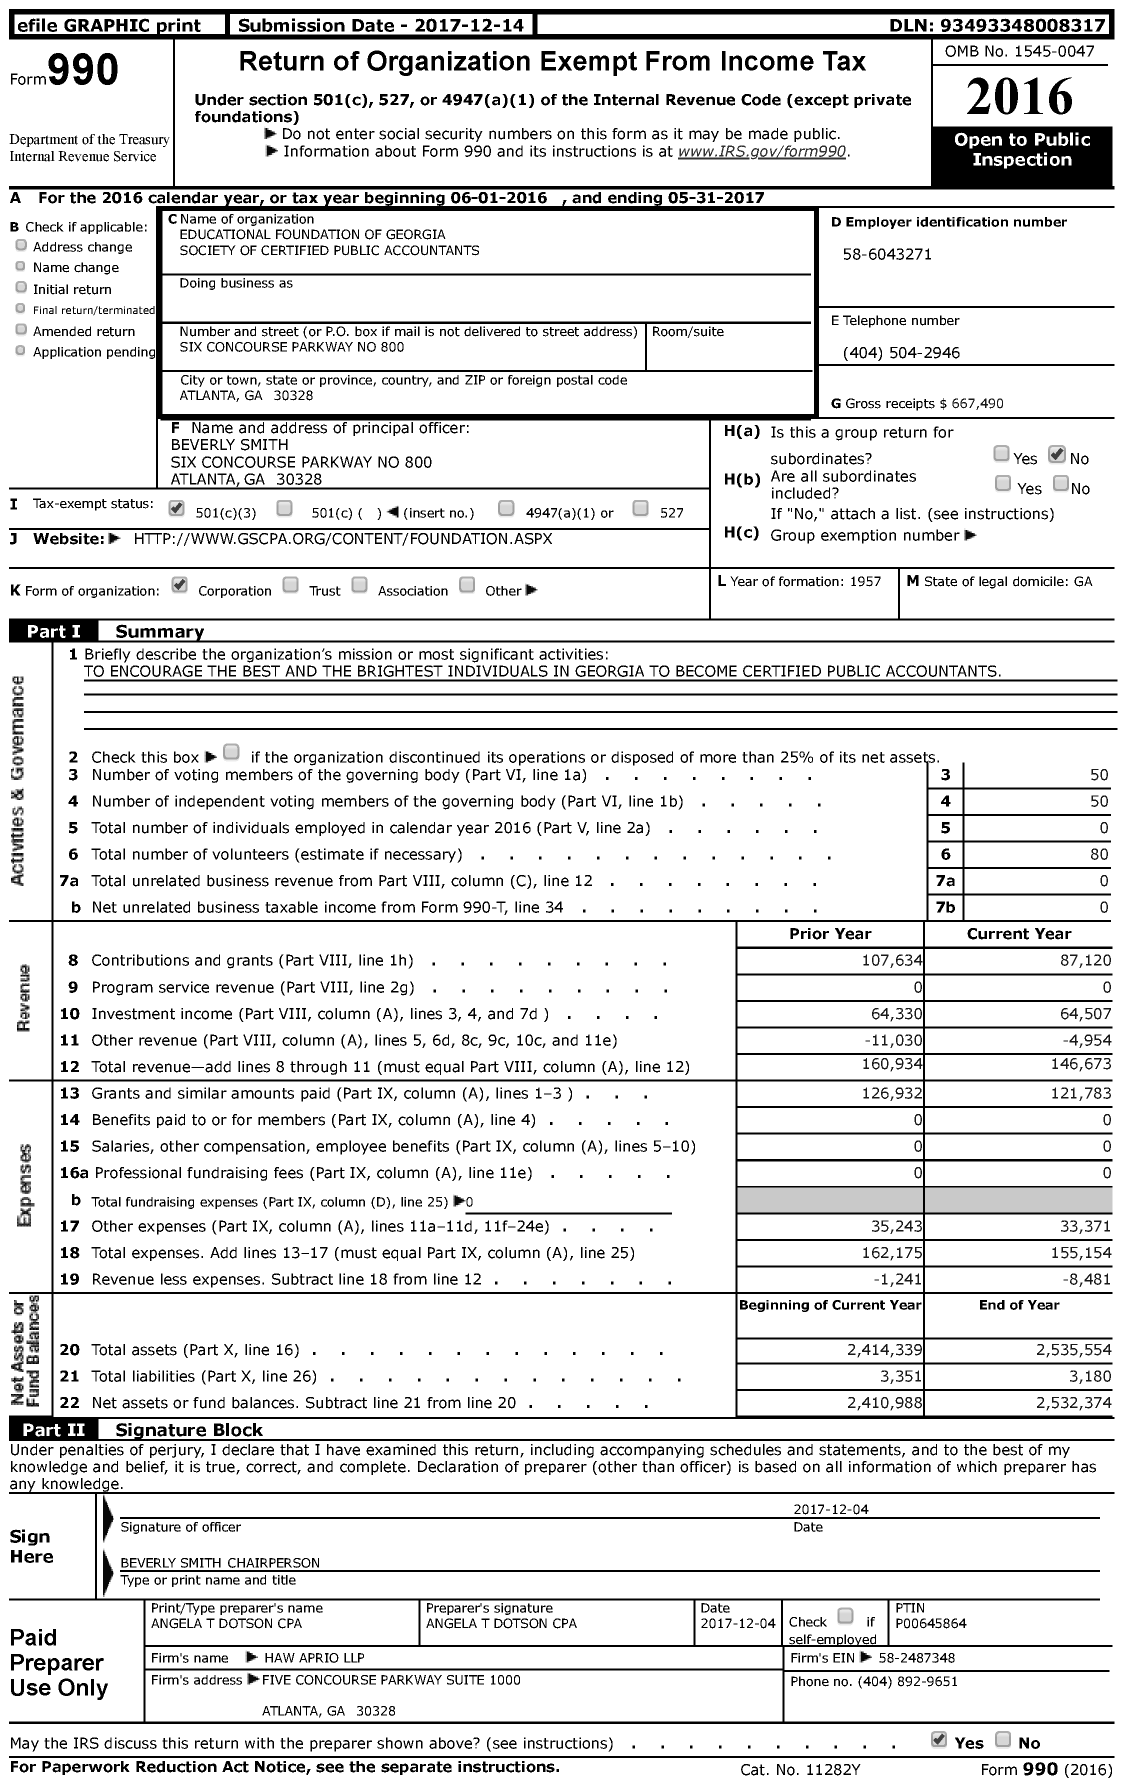 Image of first page of 2016 Form 990 for Educational Foundation of Georgia Society of Certified Public Accountants